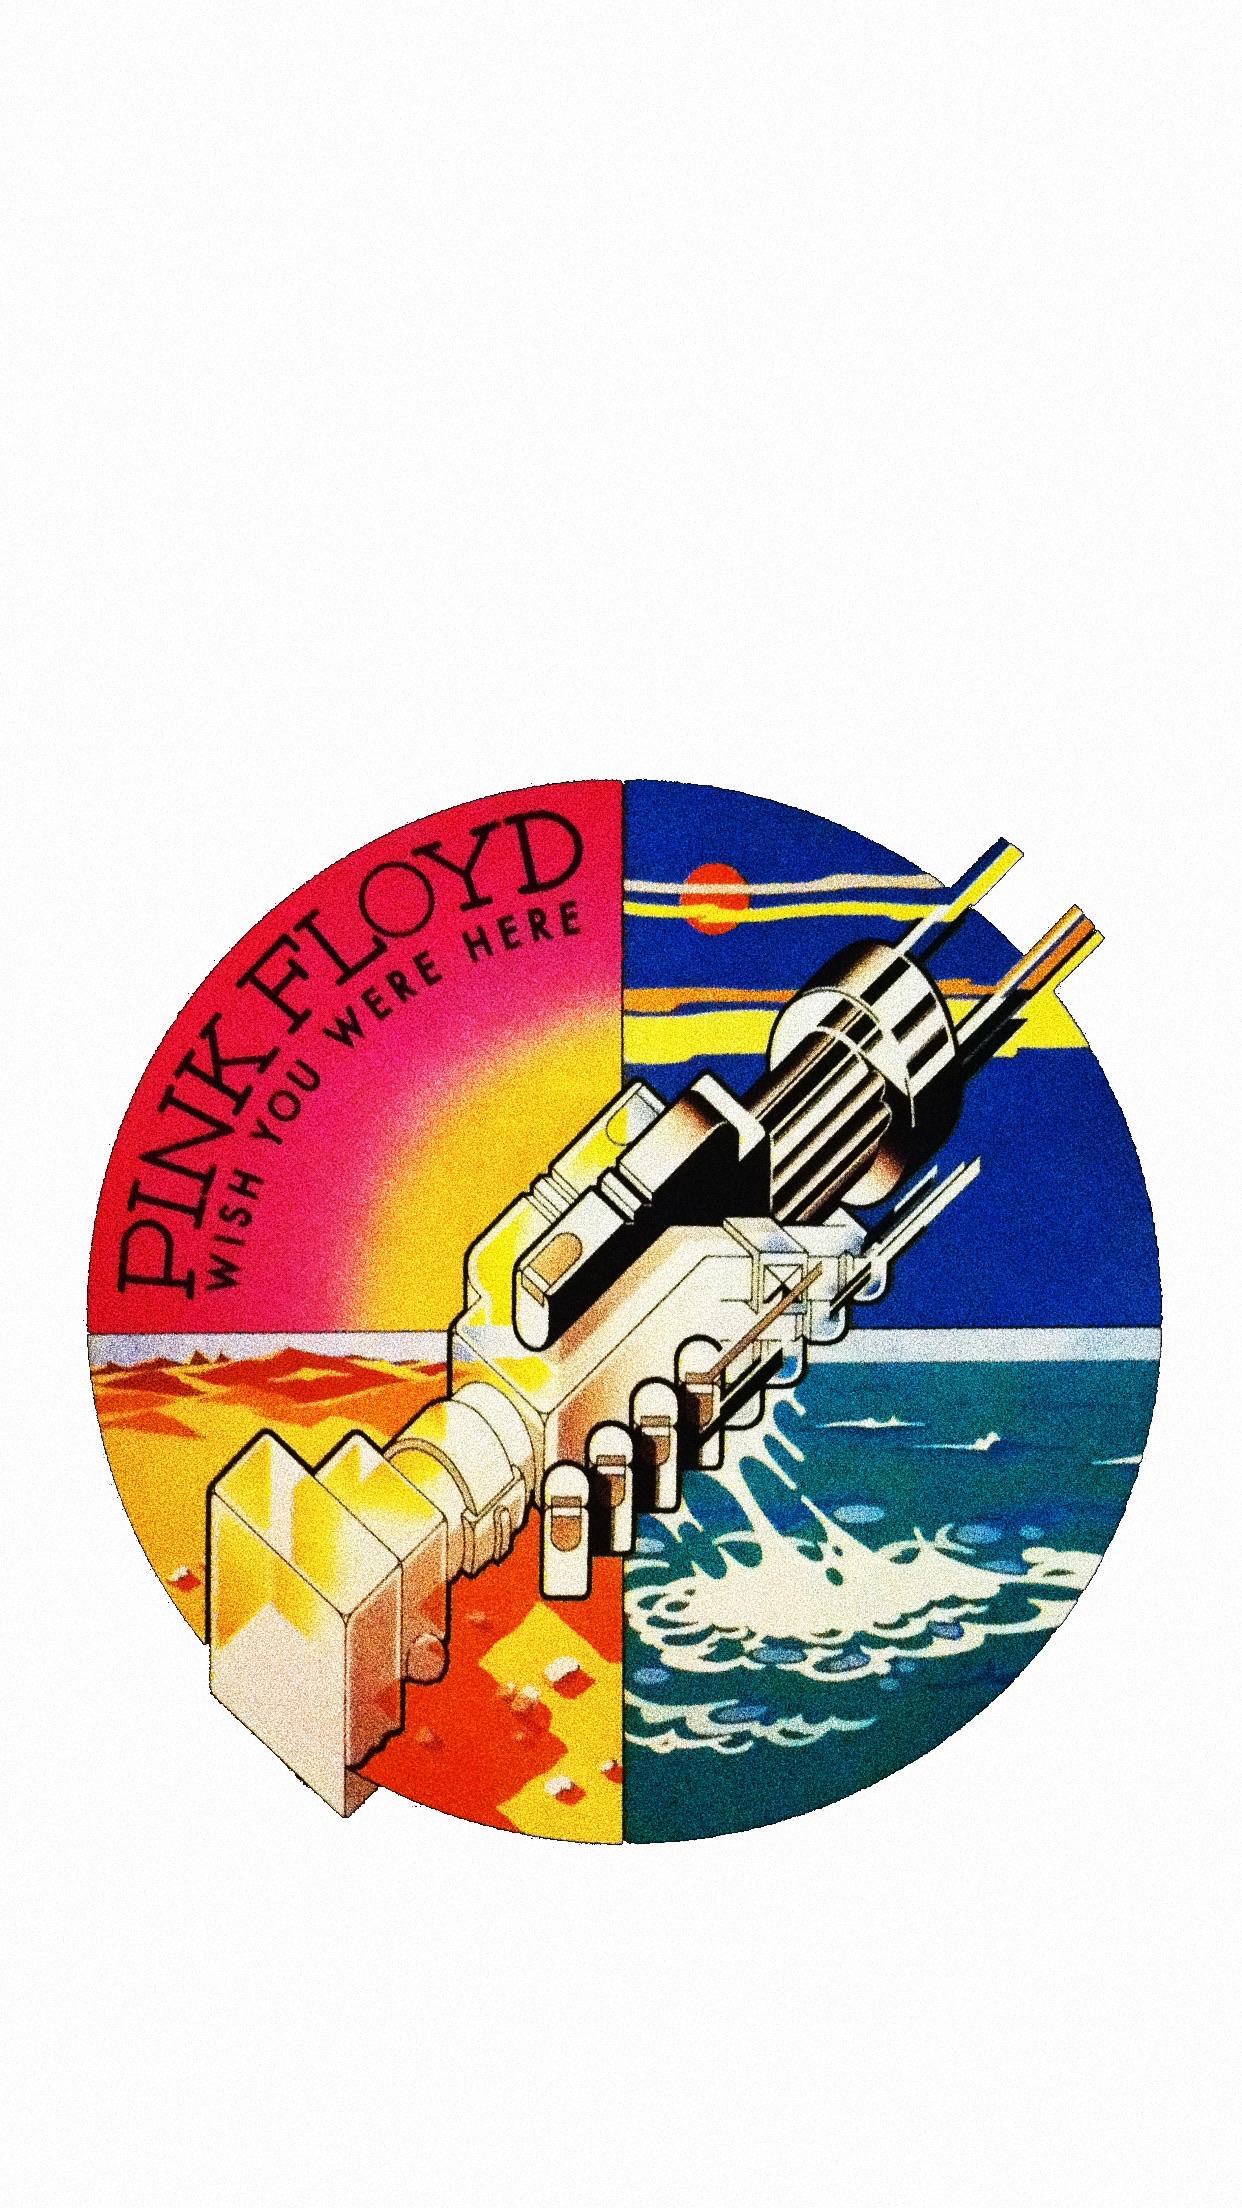 here's a lil “wish you were here” robot handshake wallpaper for ya phones: pinkfloyd